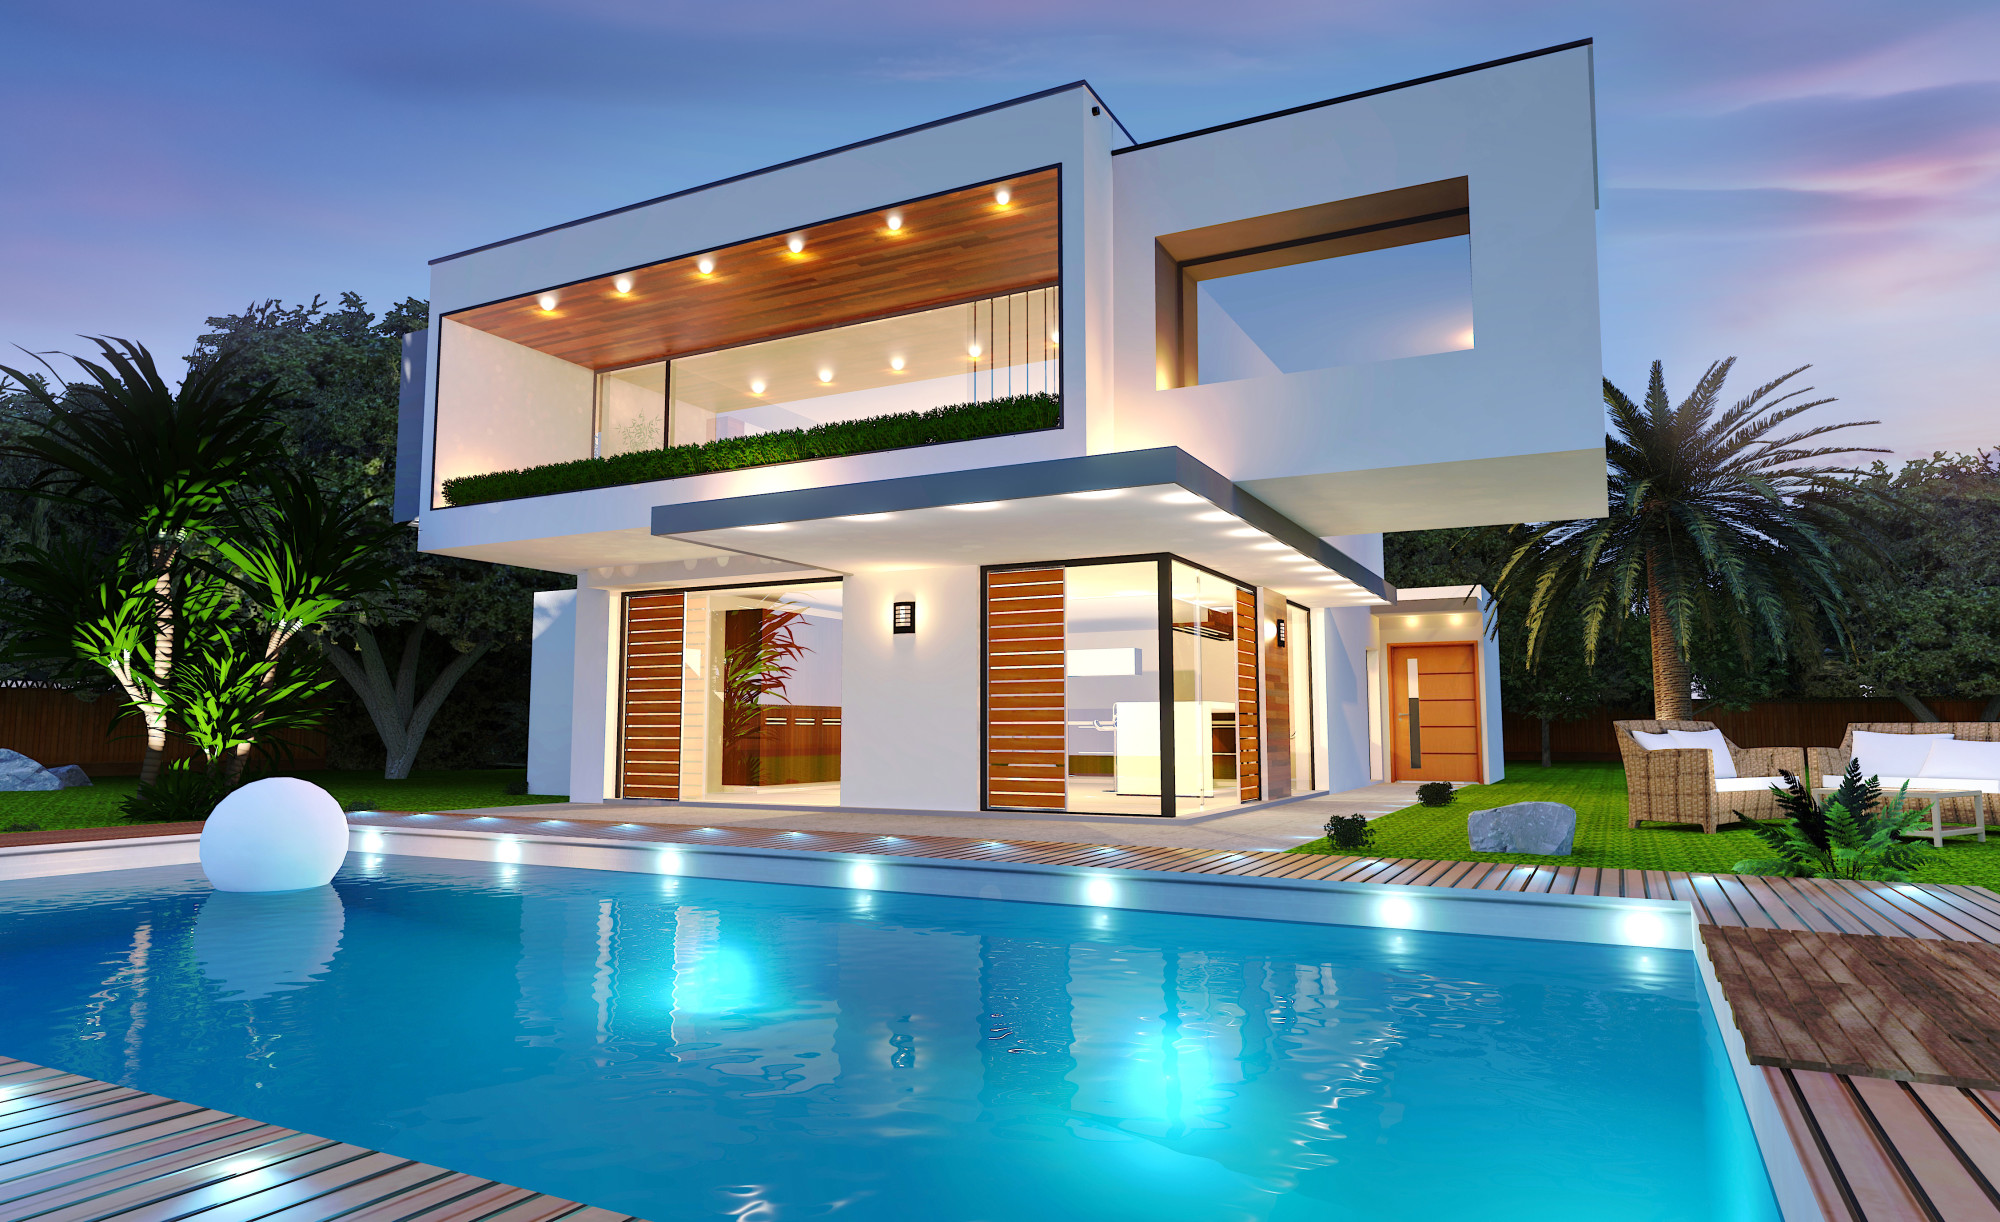 Don’t Get Ripped Off! Key Tips for Finding a Reliable Pool Contractor